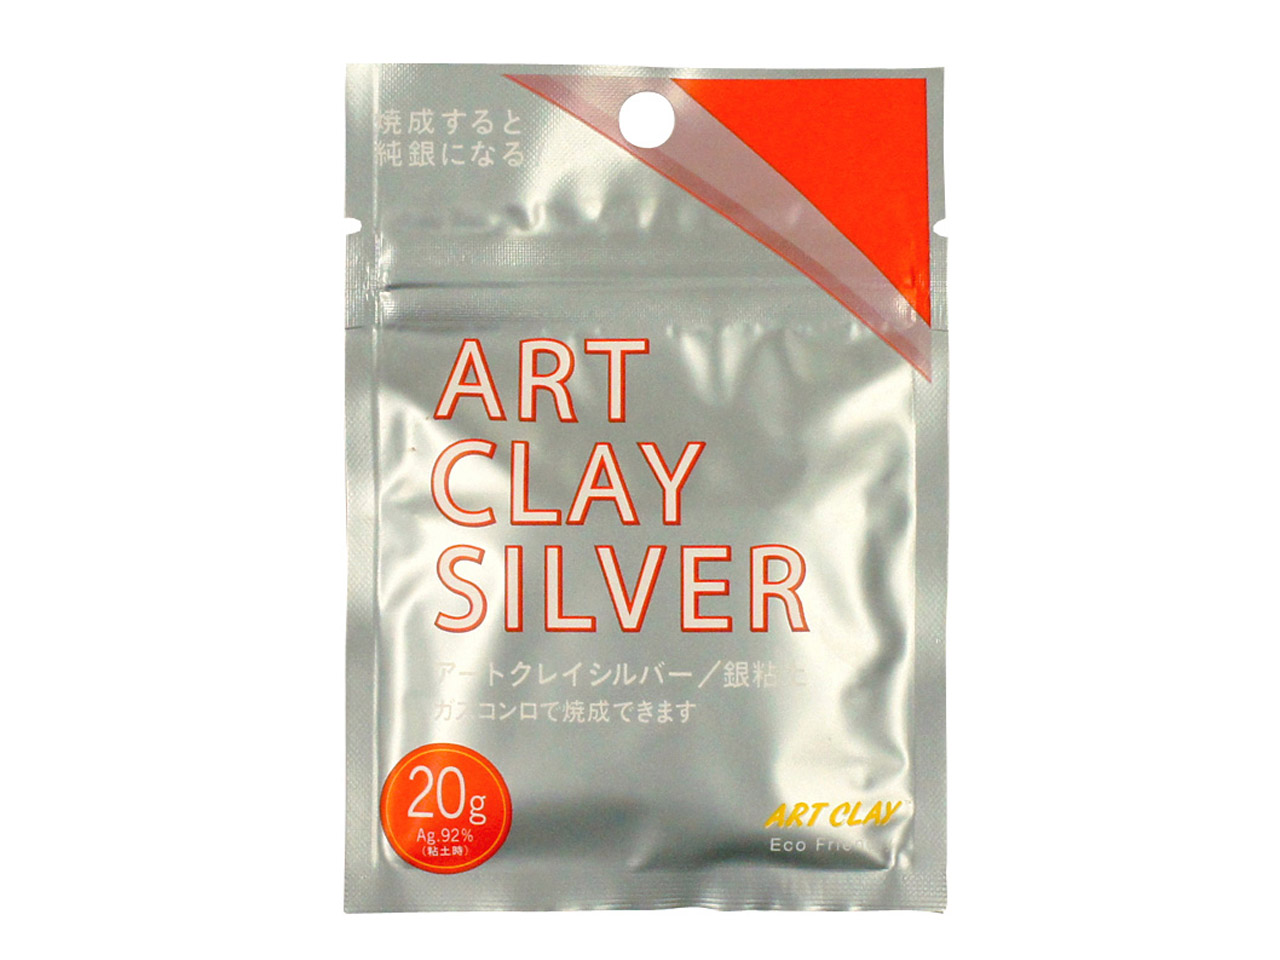 Art Clay is 100% recycled eco-silver! - Metal Clay Ltd